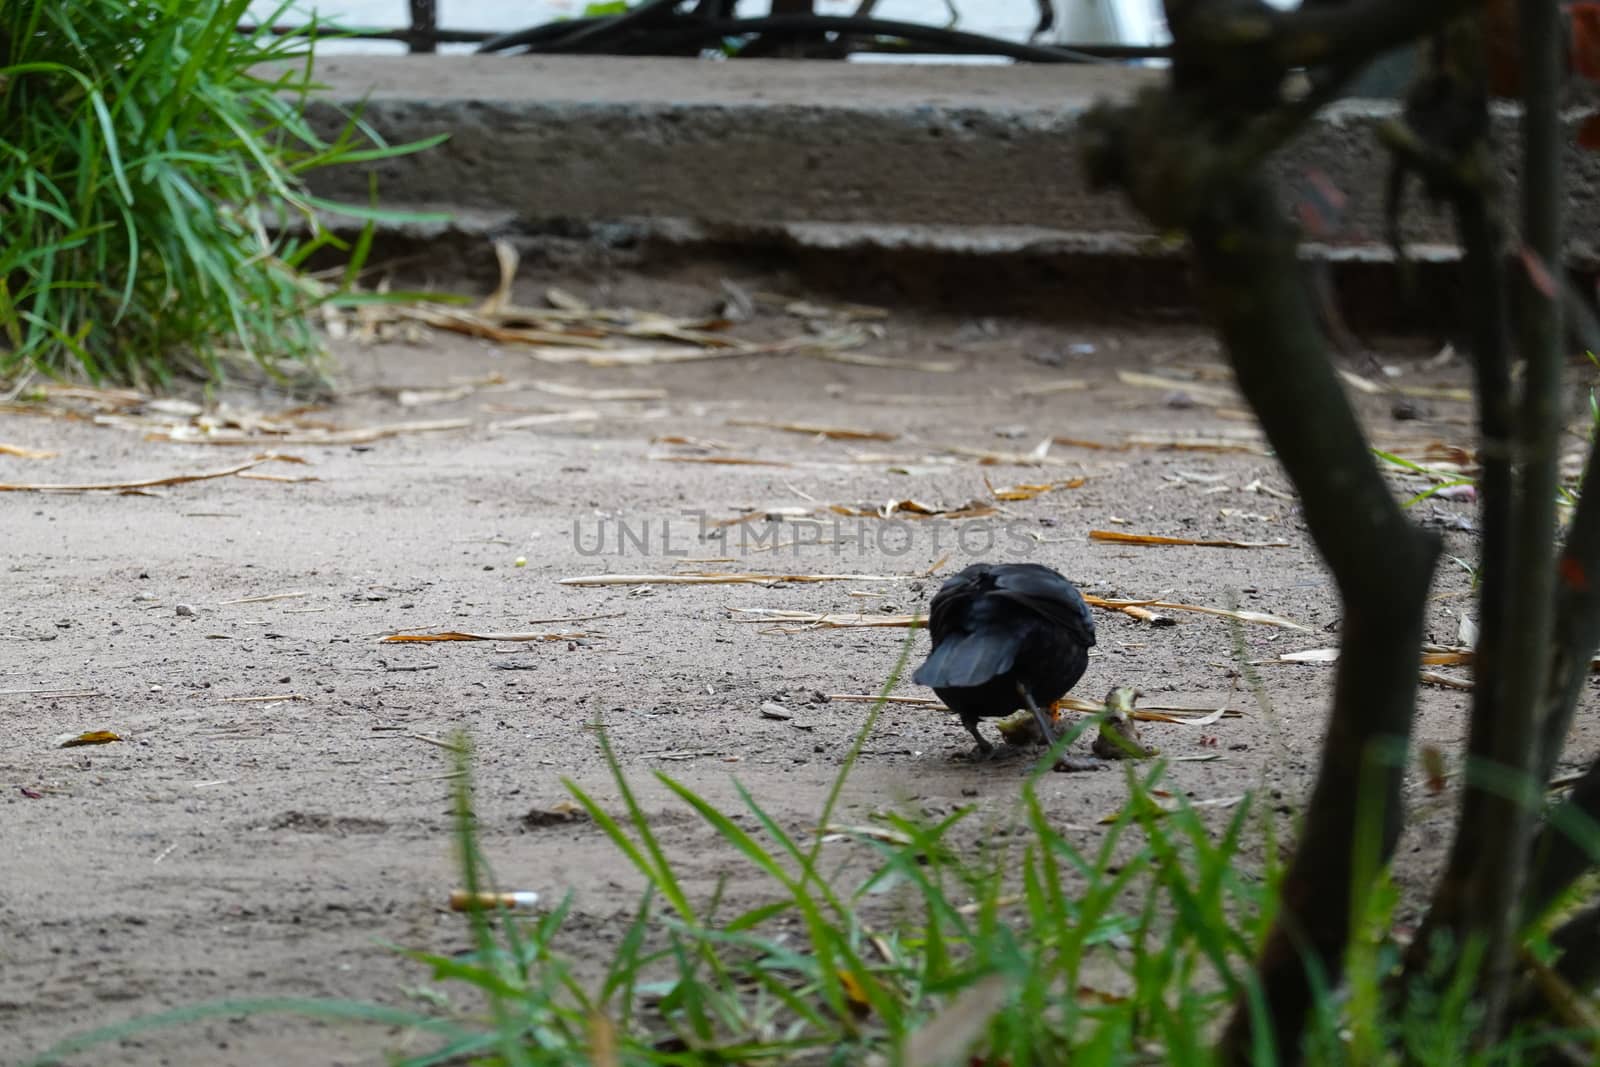 a black bird in th ground searching food.